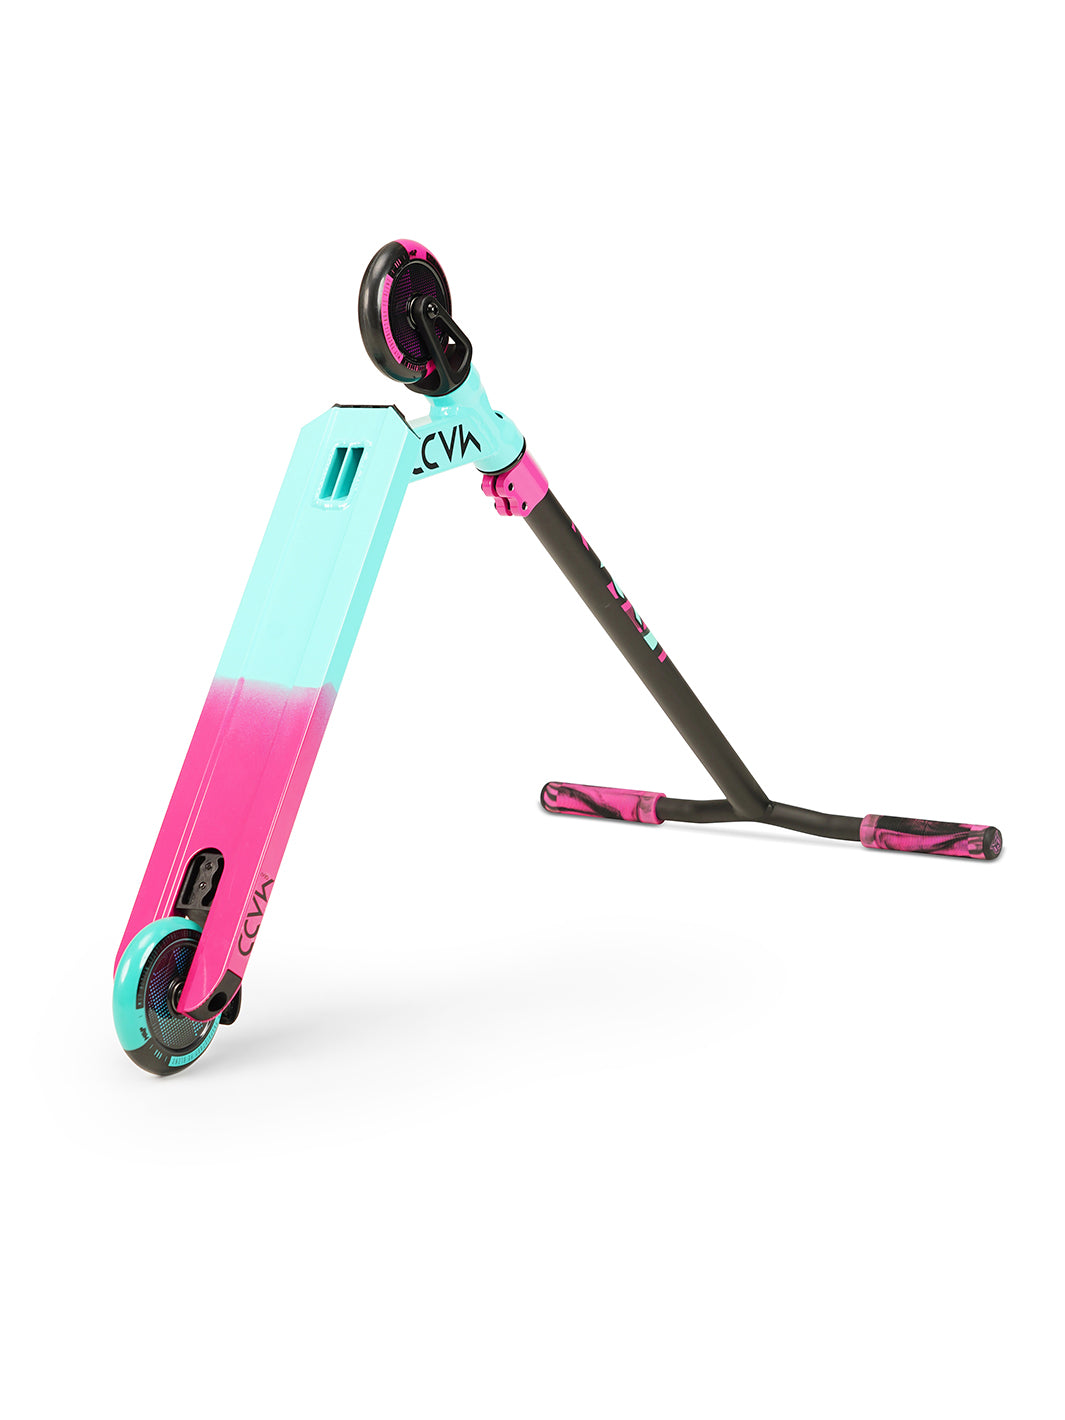 Madd Gear Kick Pro Stunt Scooter Teal Pink Complete Strong Lightweight